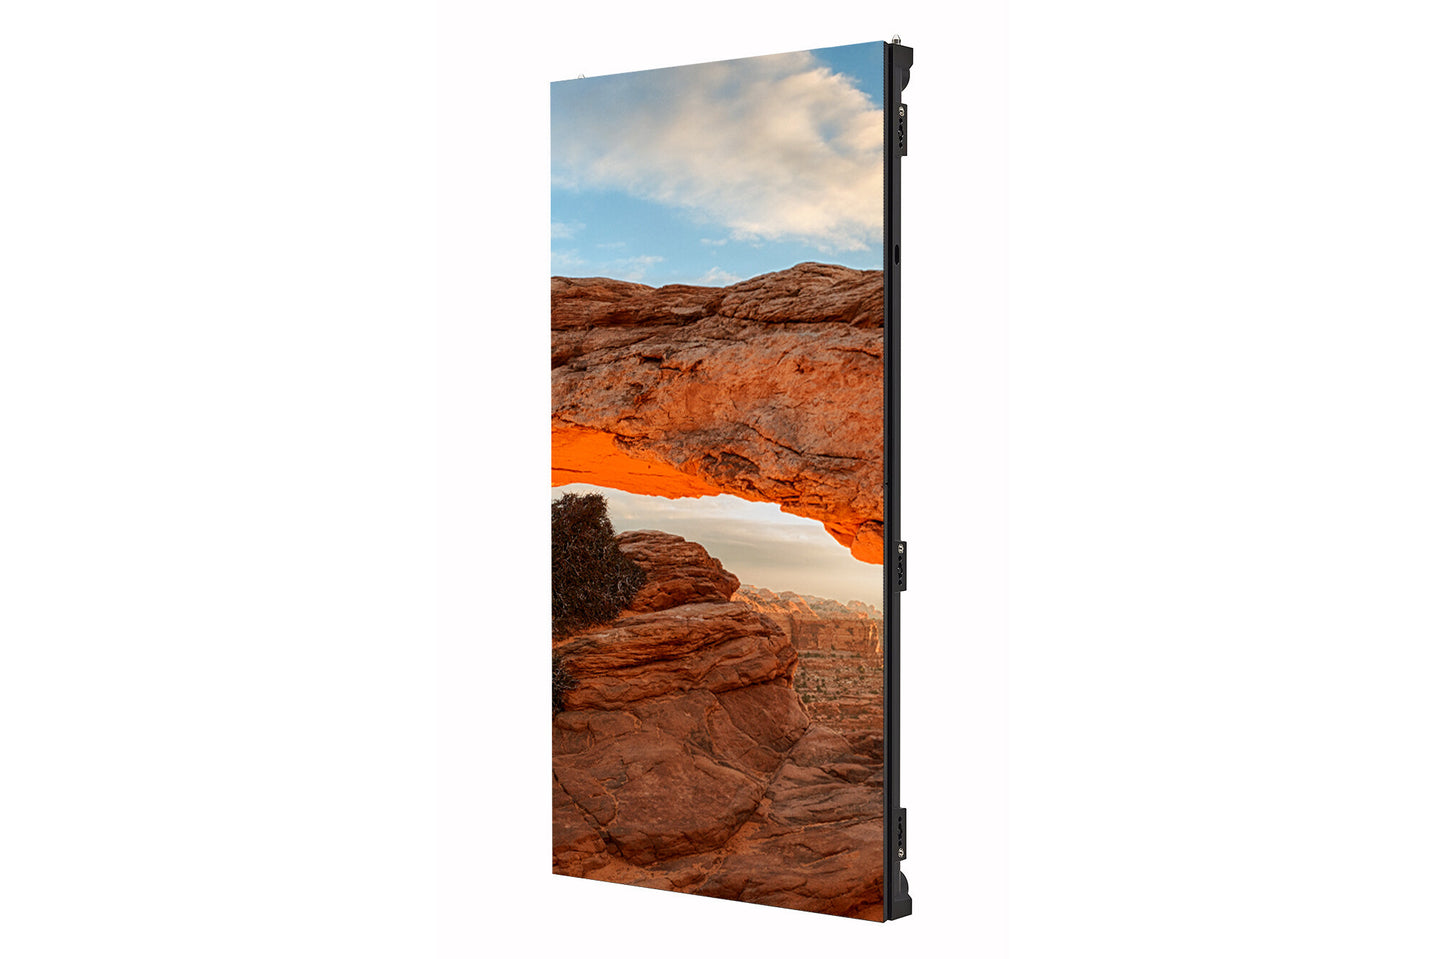 GSCA039 Outdoor LED, 3.91 mm Pixel Pitch